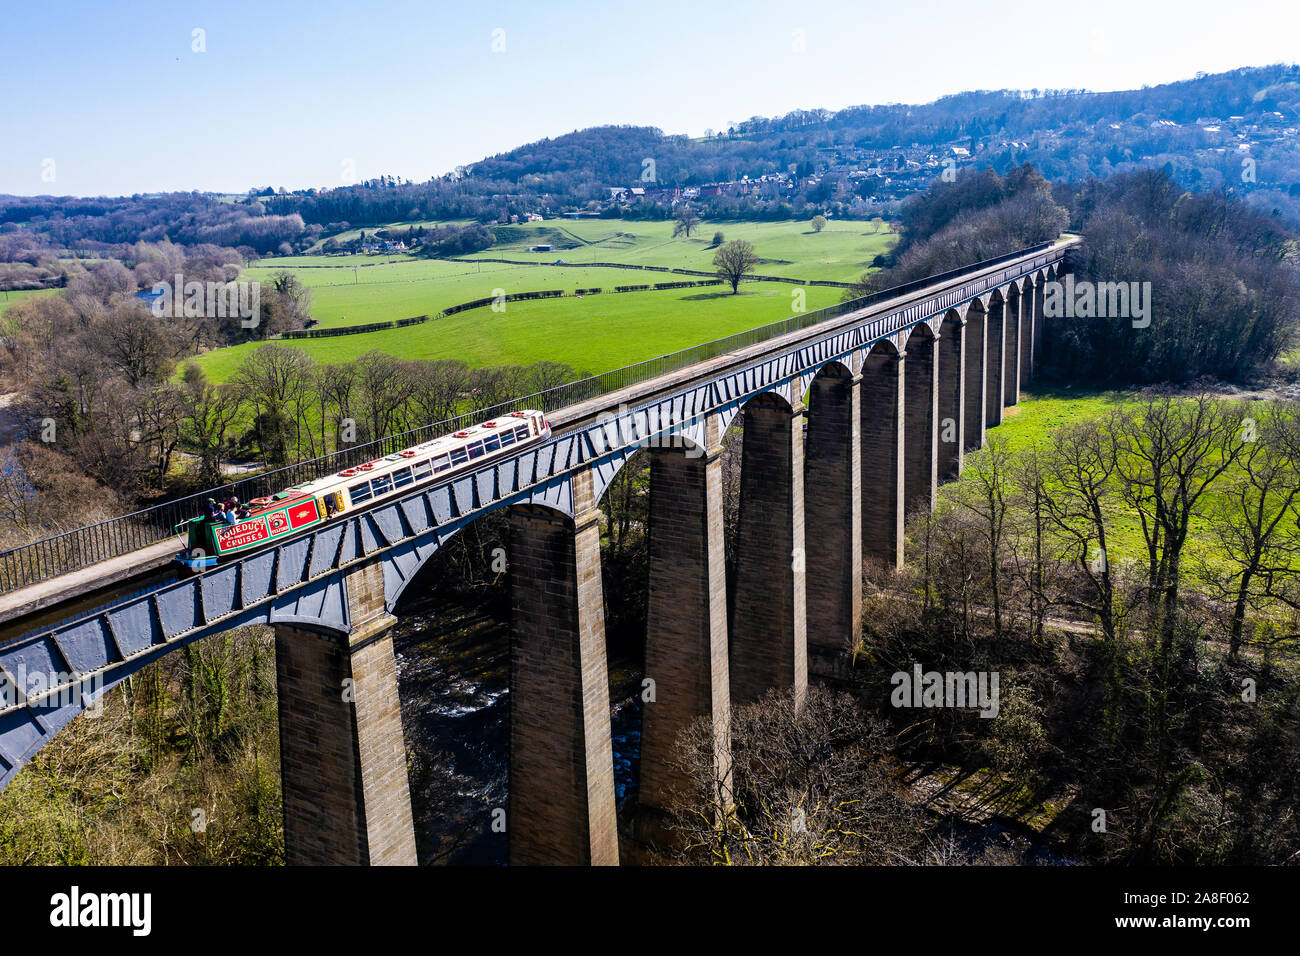 Aerial view of a Narrow Boat, canal boat crossing the Pontcysyllte Aqueduct located in the beautiful Welsh countryside, famous Llangollen Canal route Stock Photo